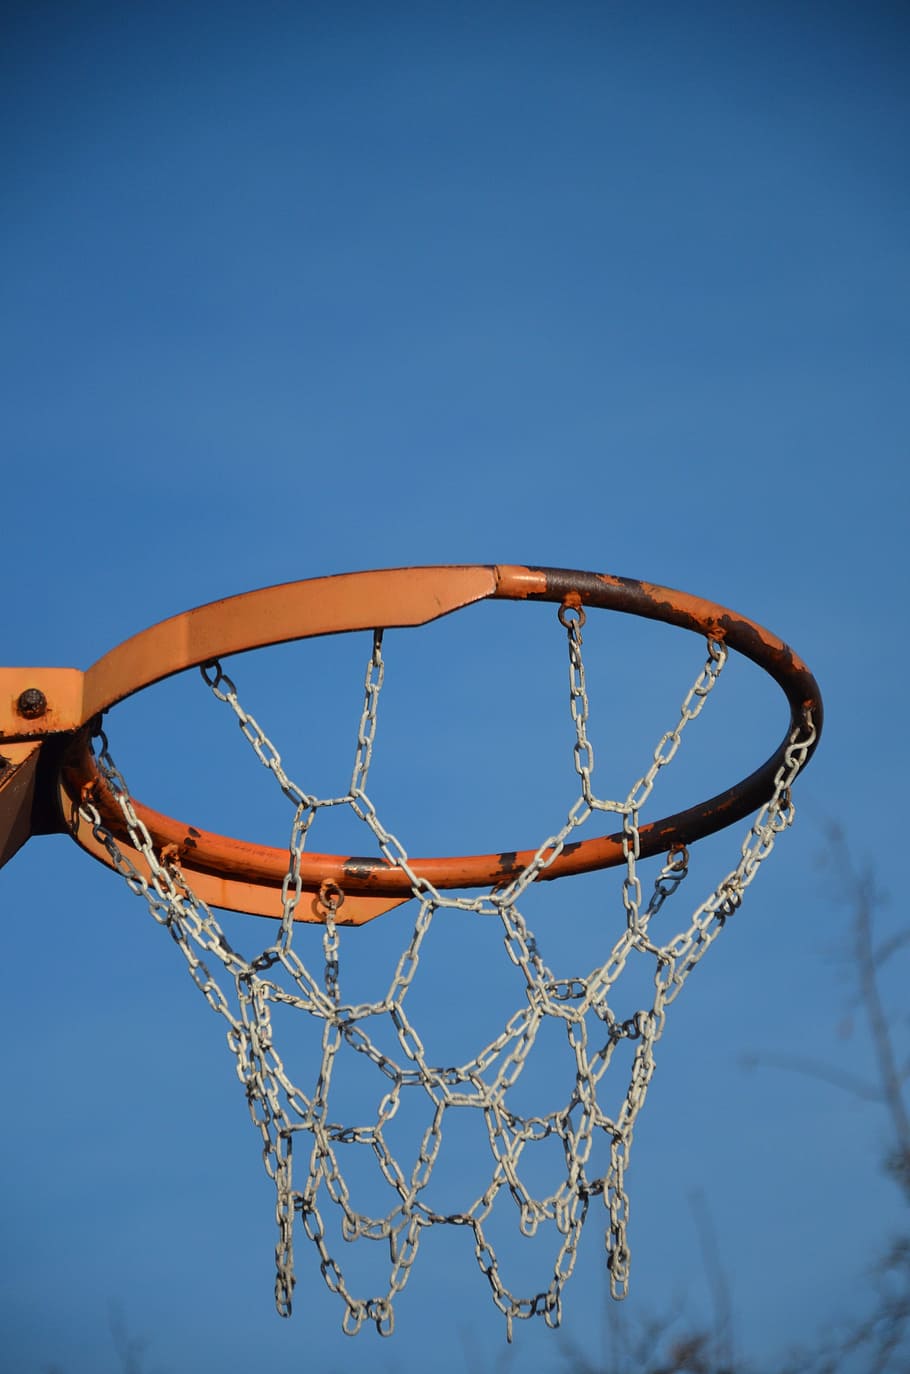 Basketball, Ball, Sport, Sport, Game, ball, sport, game, competition, play, equipment, basket